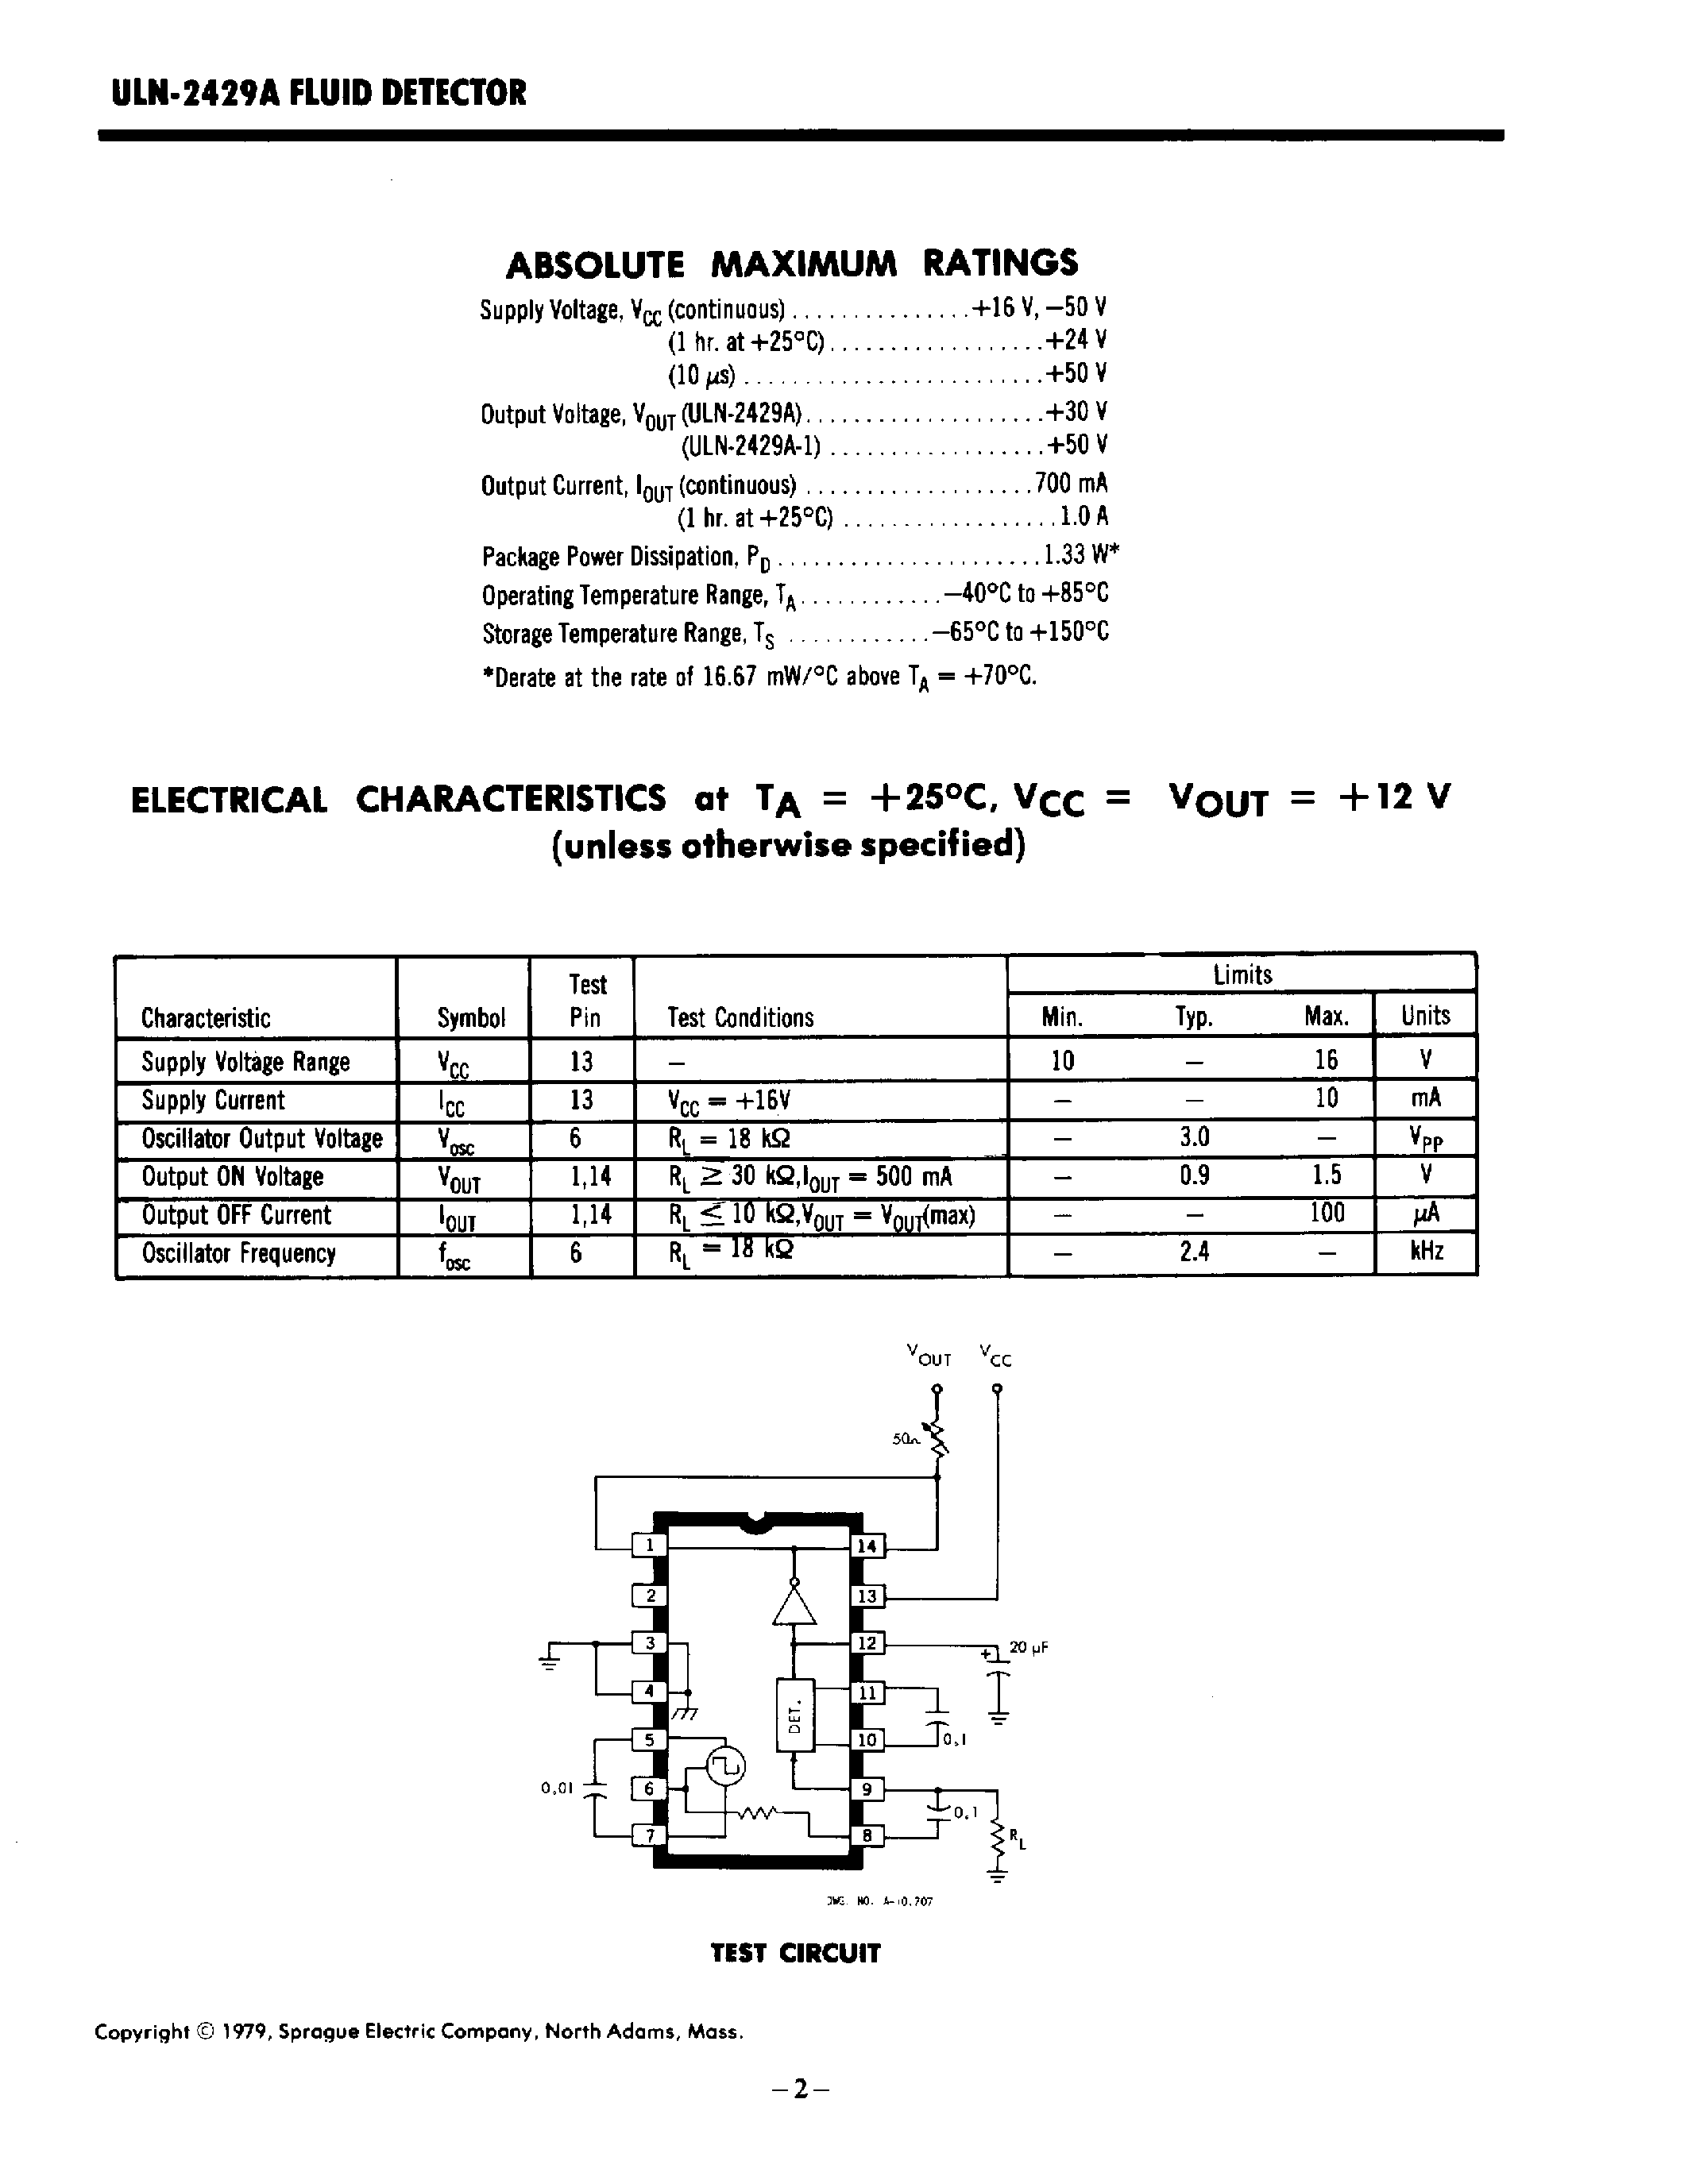 Datasheet ULN2429A - Fluid Detector page 2